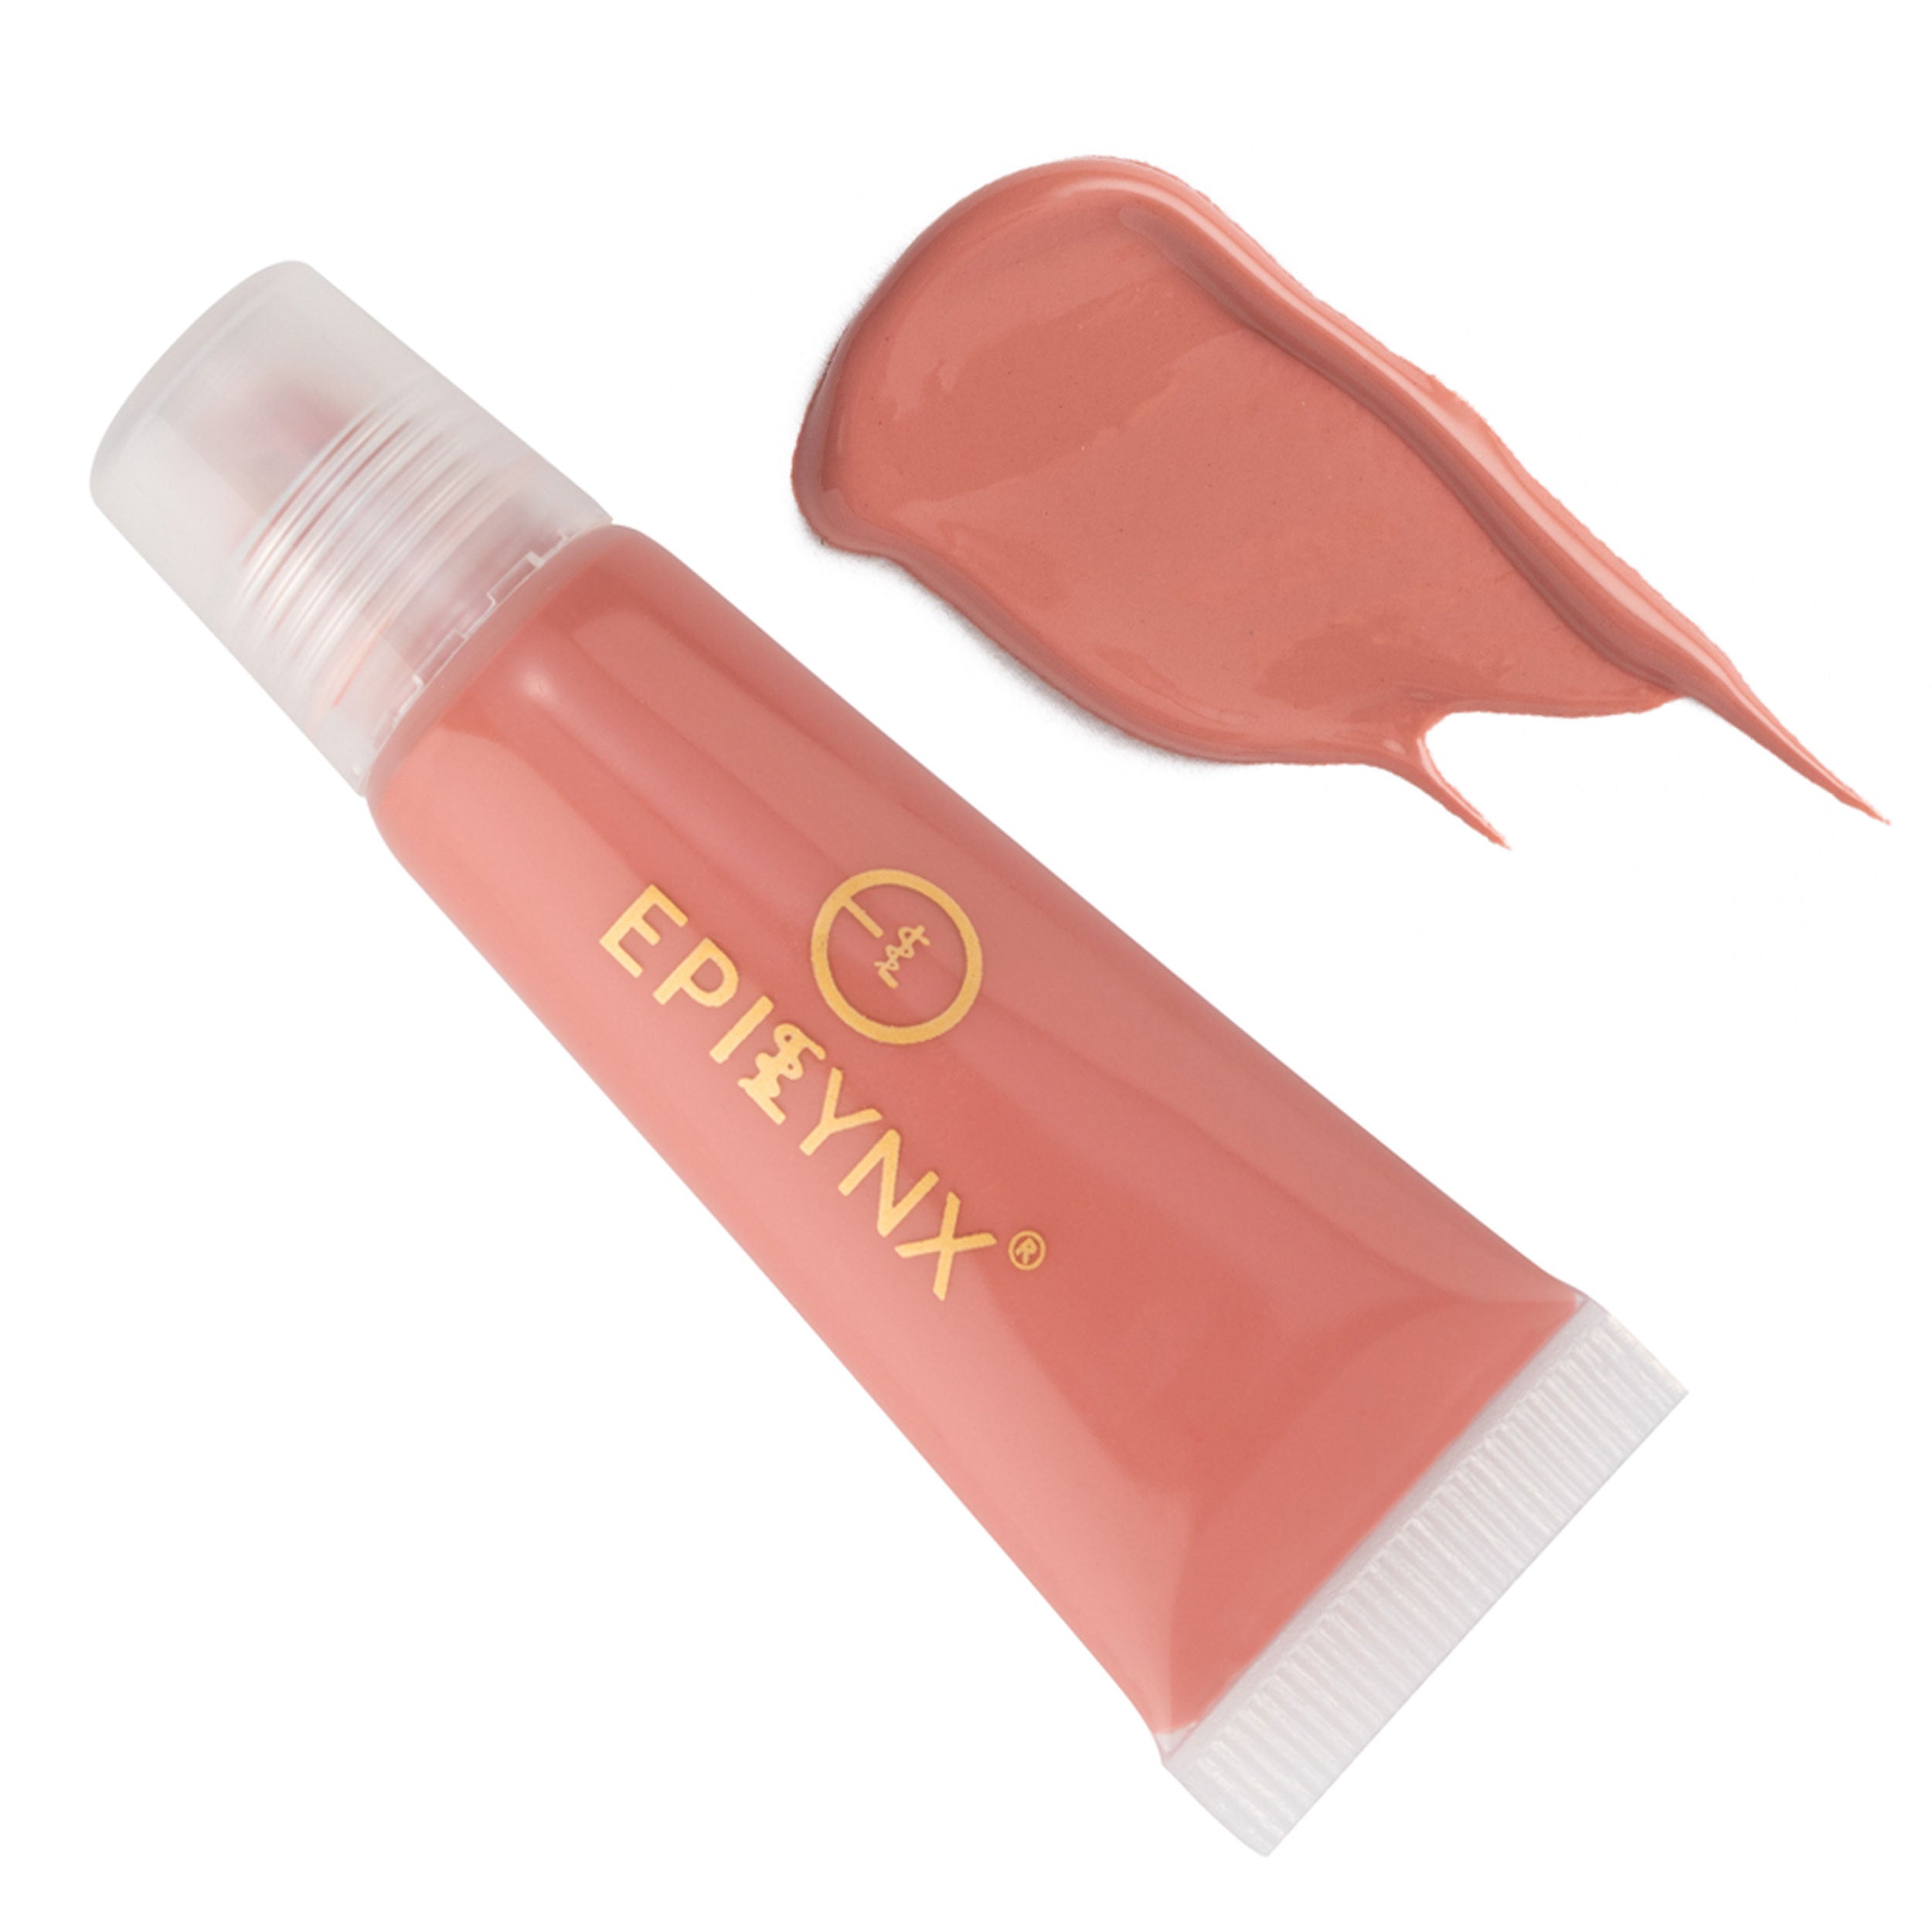 Intensely Hydrating Lip Balm – For Smooth Lips